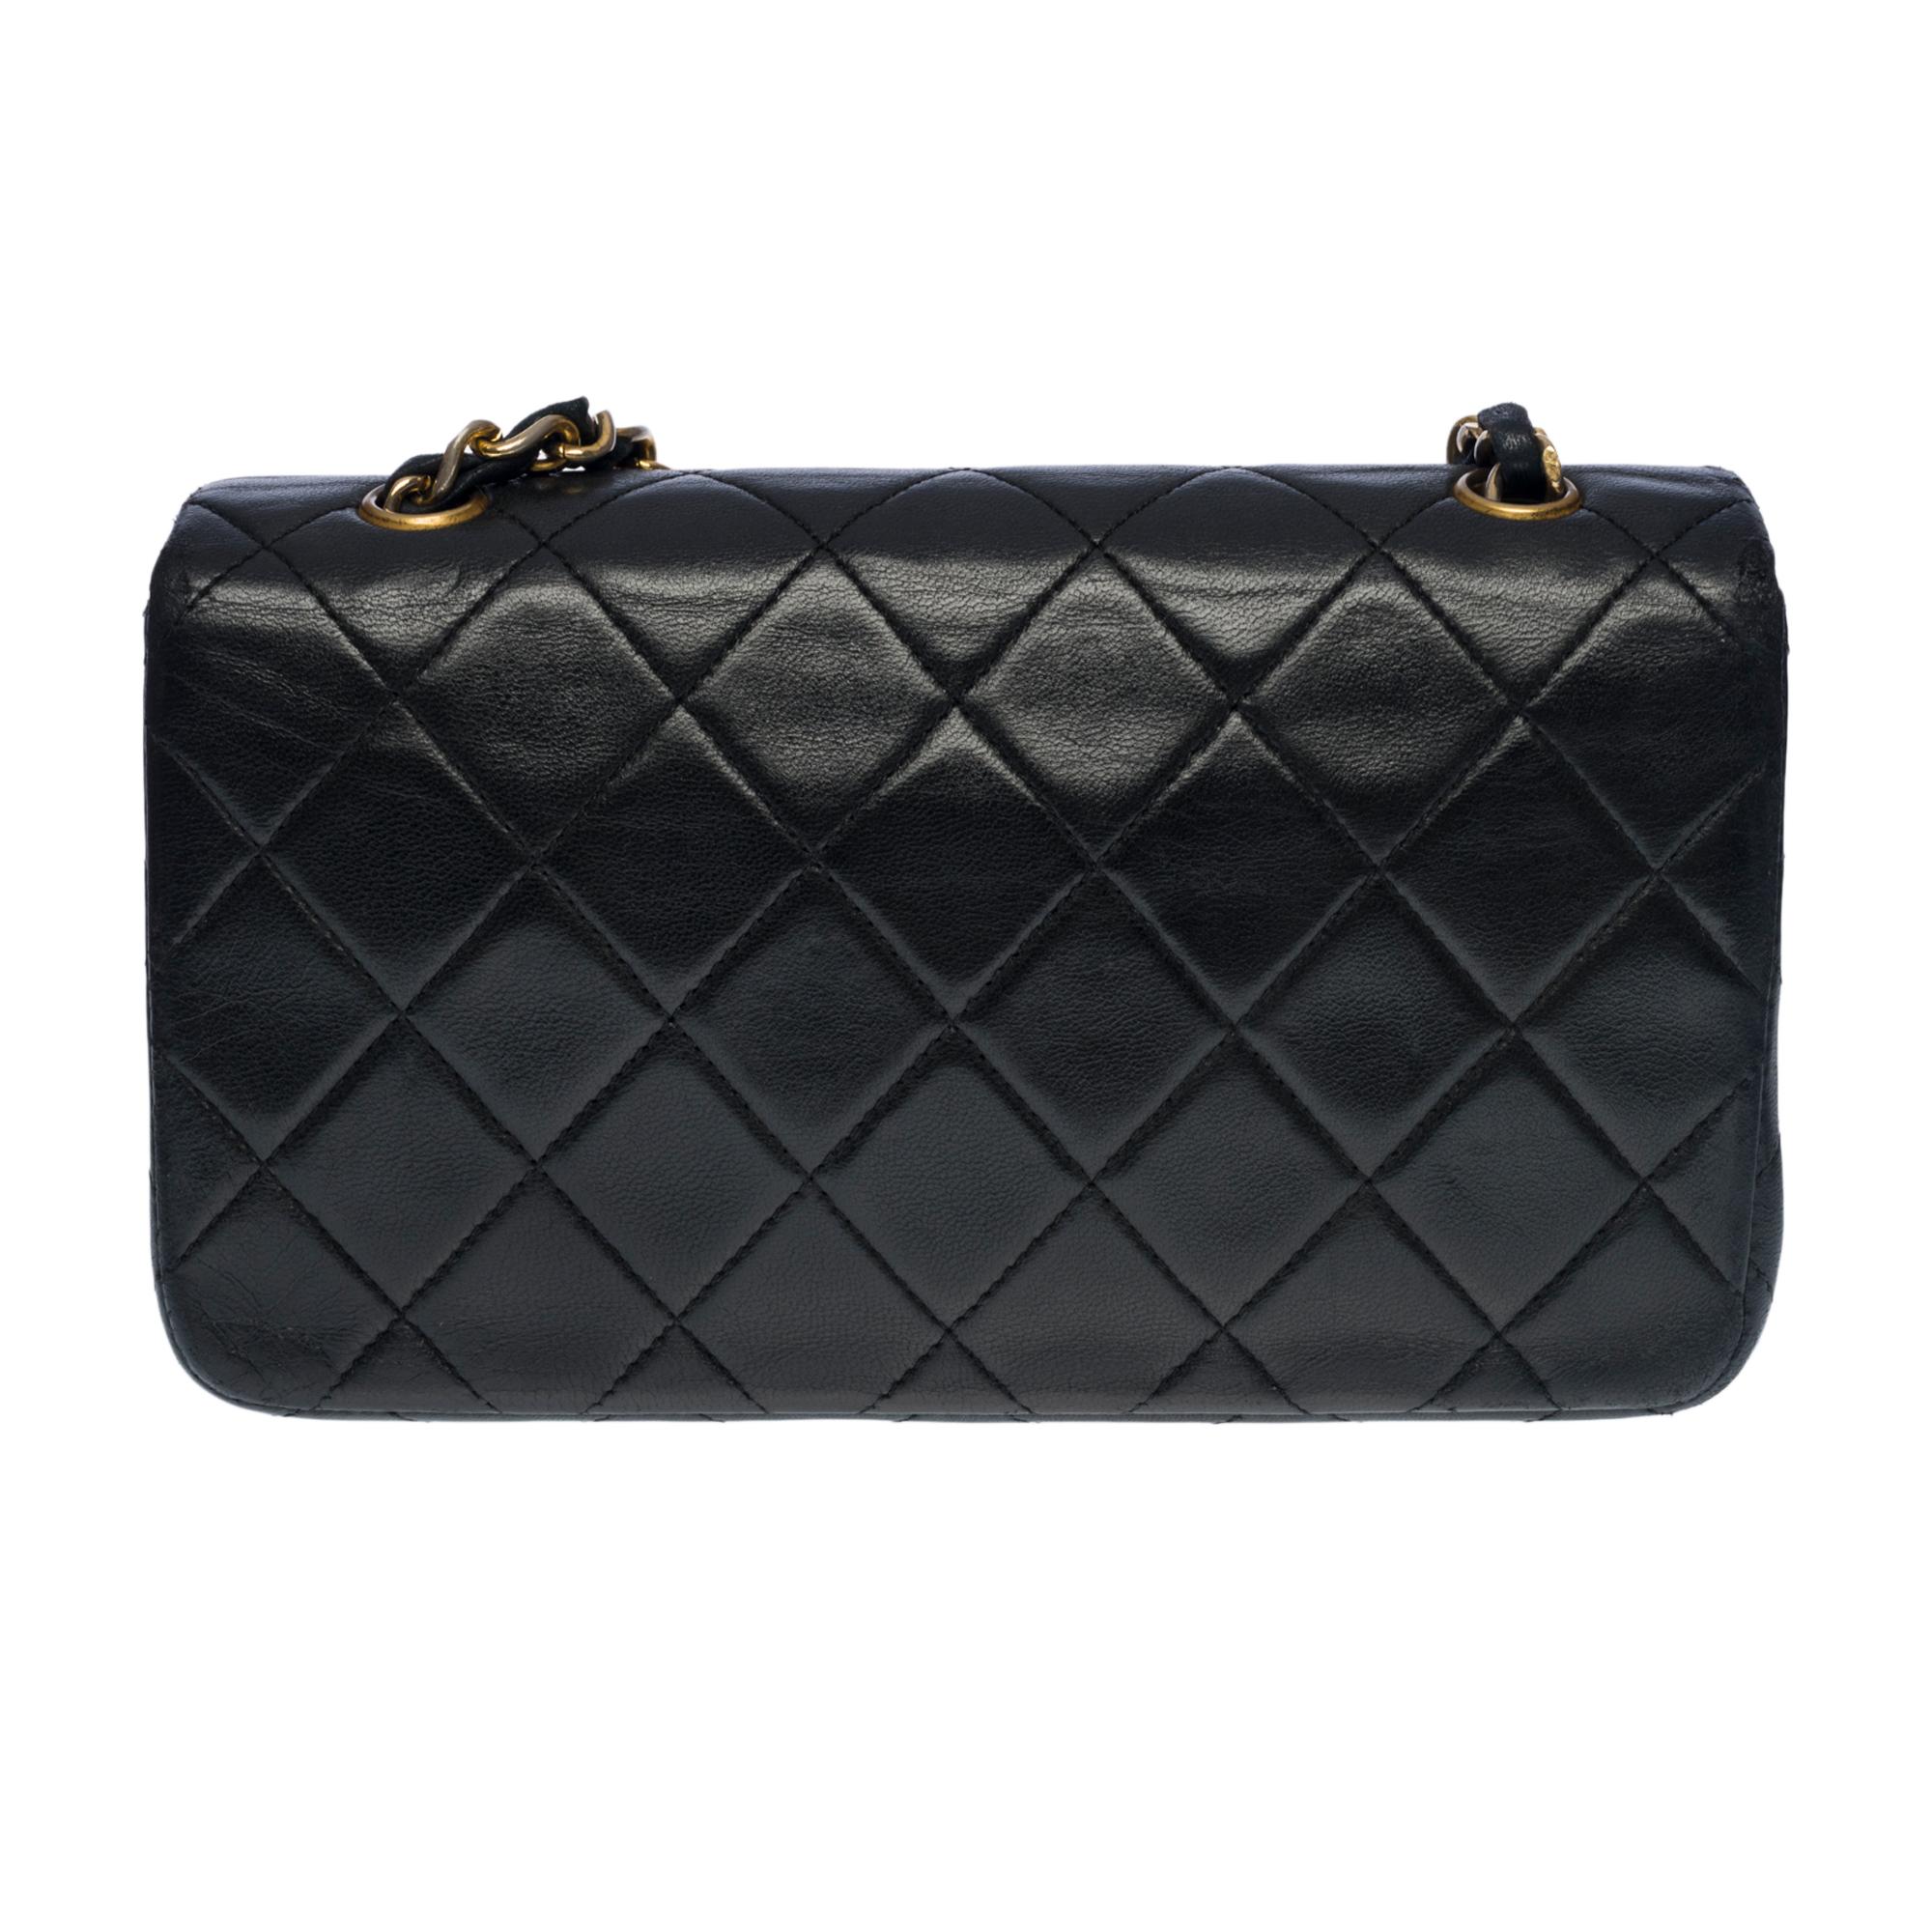 Black Chanel Classic Mini Full Flap shoulder bag in black quilted lambskin leather, GHW